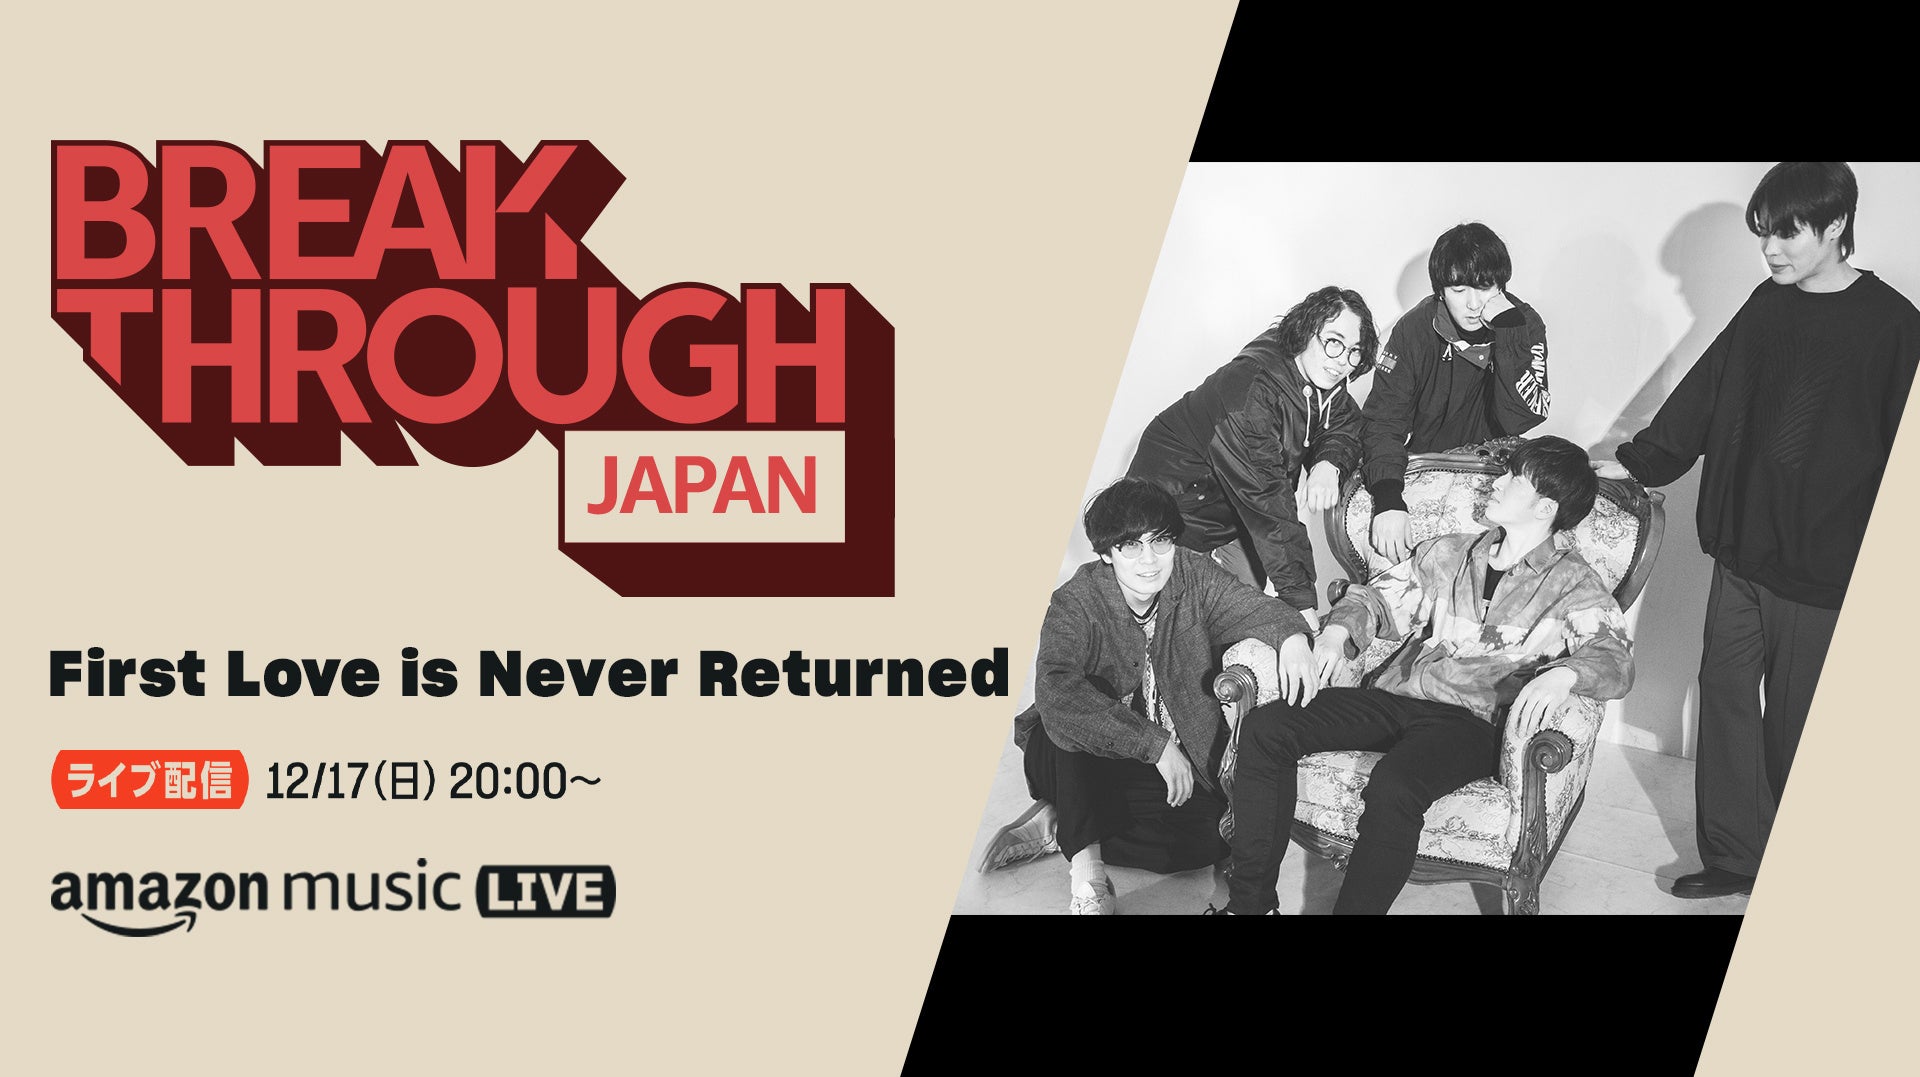 Amazon Musicが「BREAKTHROUGH JAPAN Live」でFirst Love is Never Returnedを配信！